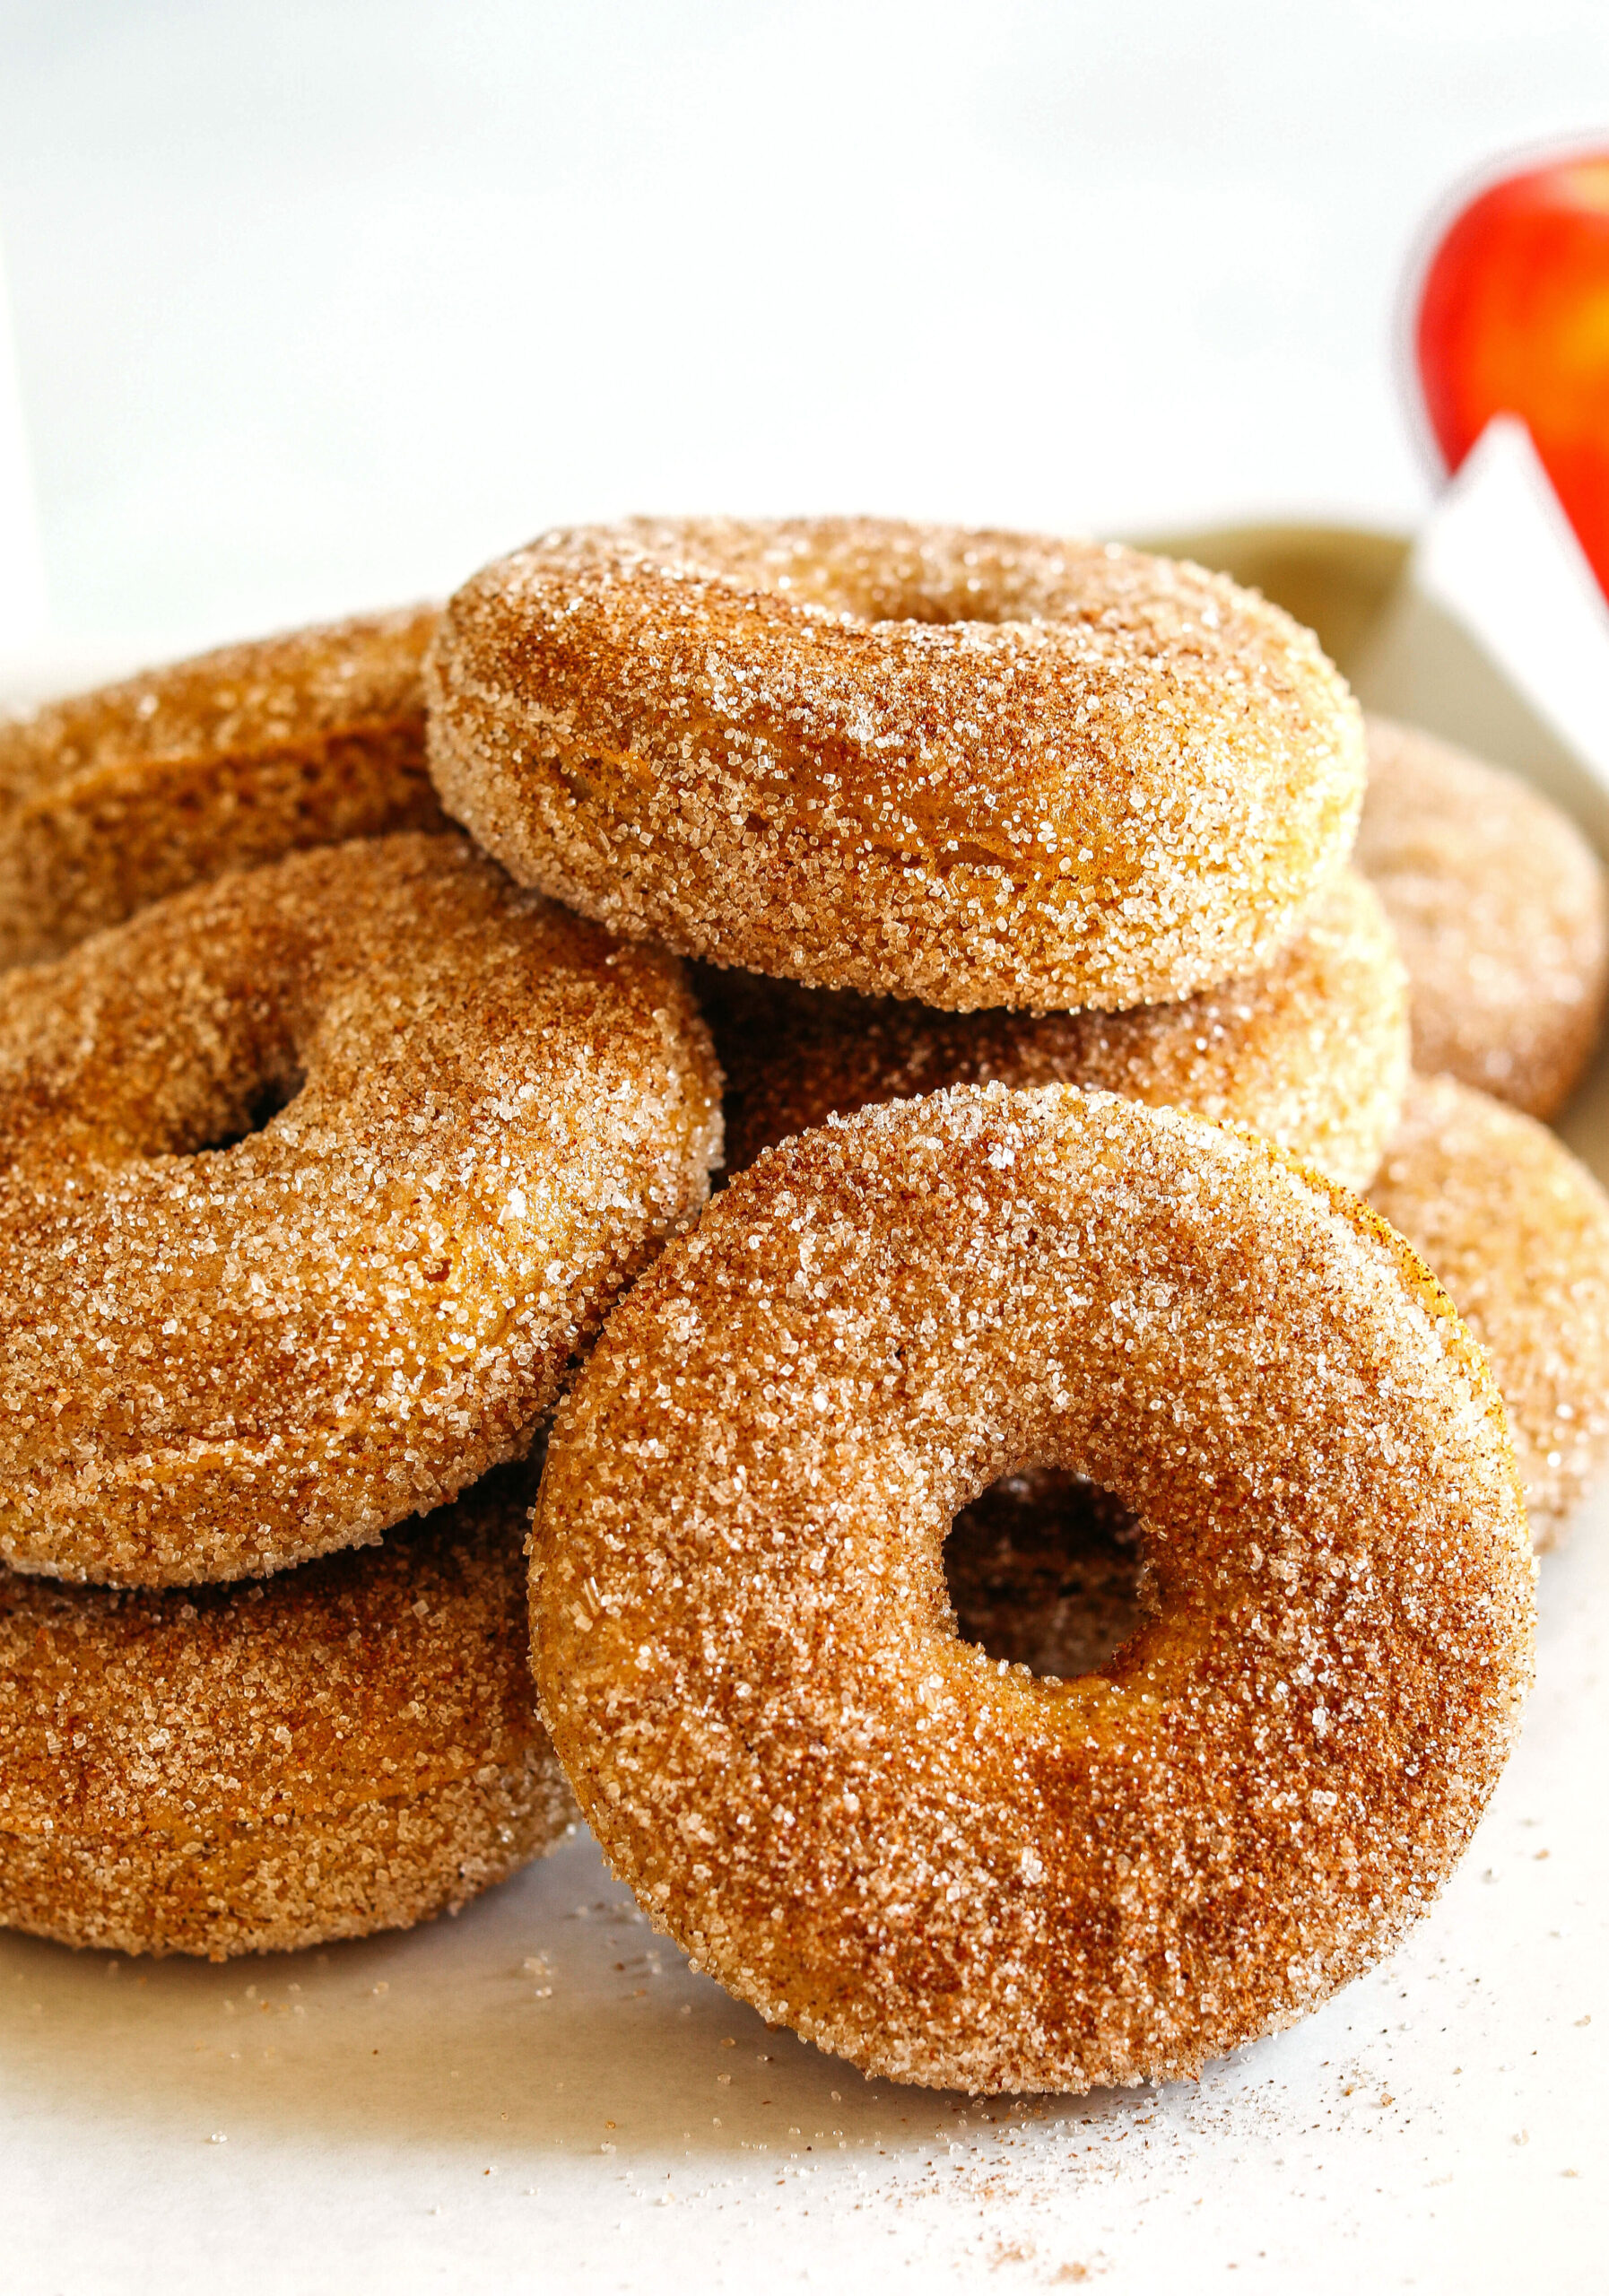 Soft Baked Apple Cider Donuts made healthier with whole wheat flour, applesauce and Greek yogurt for the perfect fall treat that comes together in just 20 minutes!  Loaded with warm spices and coated with cinnamon and sugar!